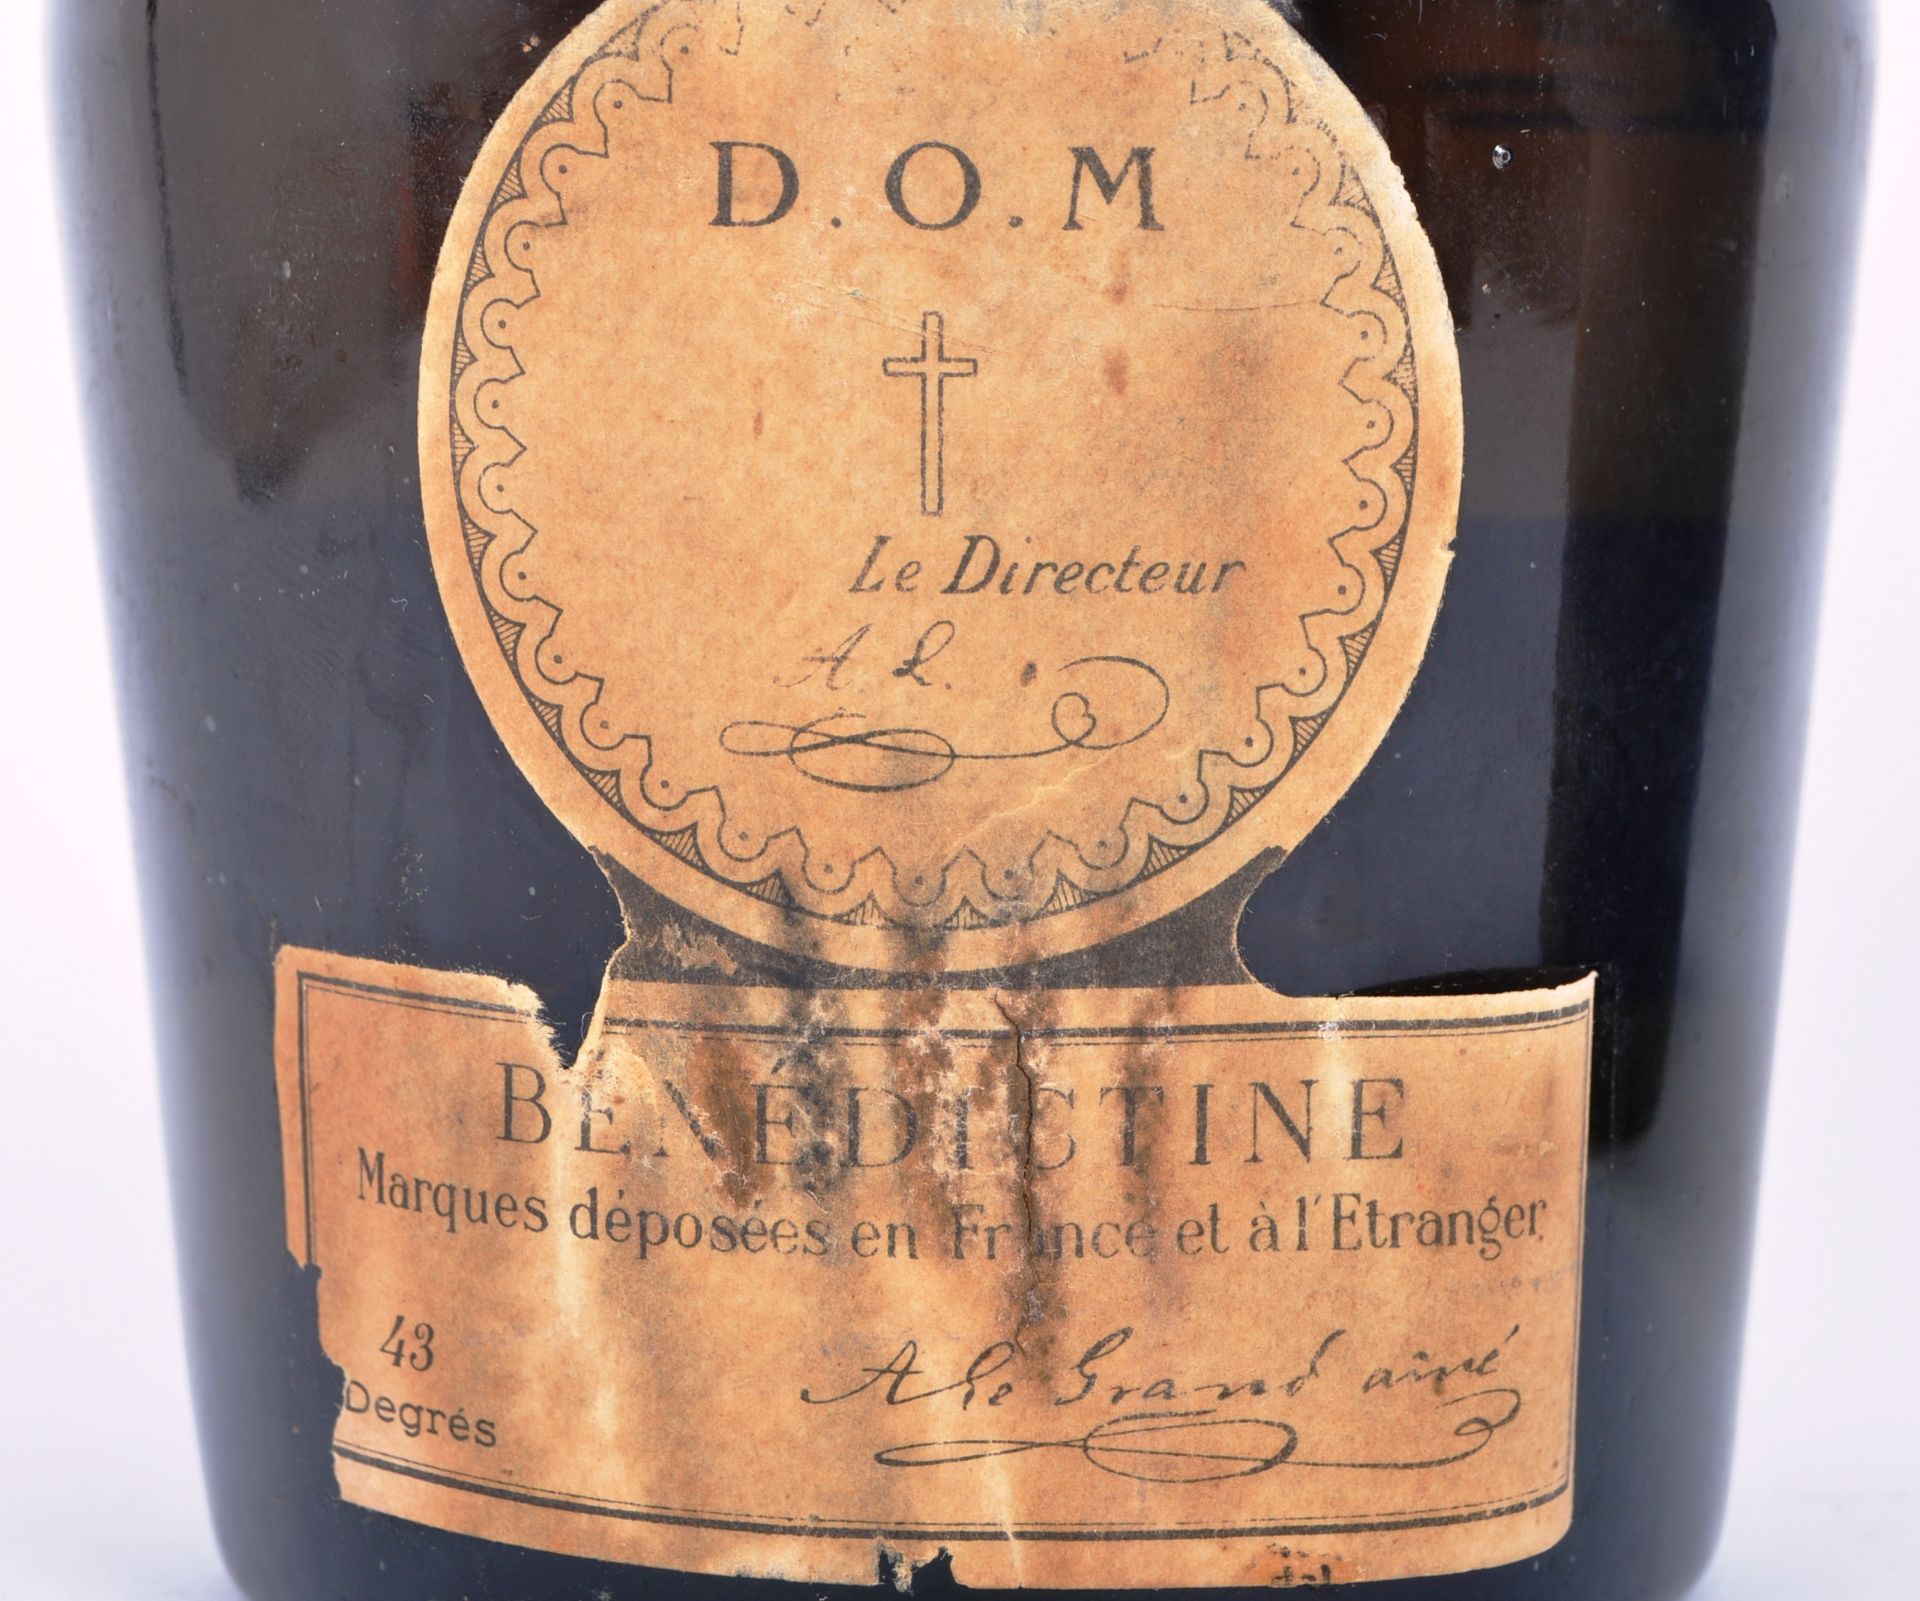 D.O.M. BENEDICTINE - TWO BOTTLES OF VINTAGE CHAMPAGNE - Image 3 of 11